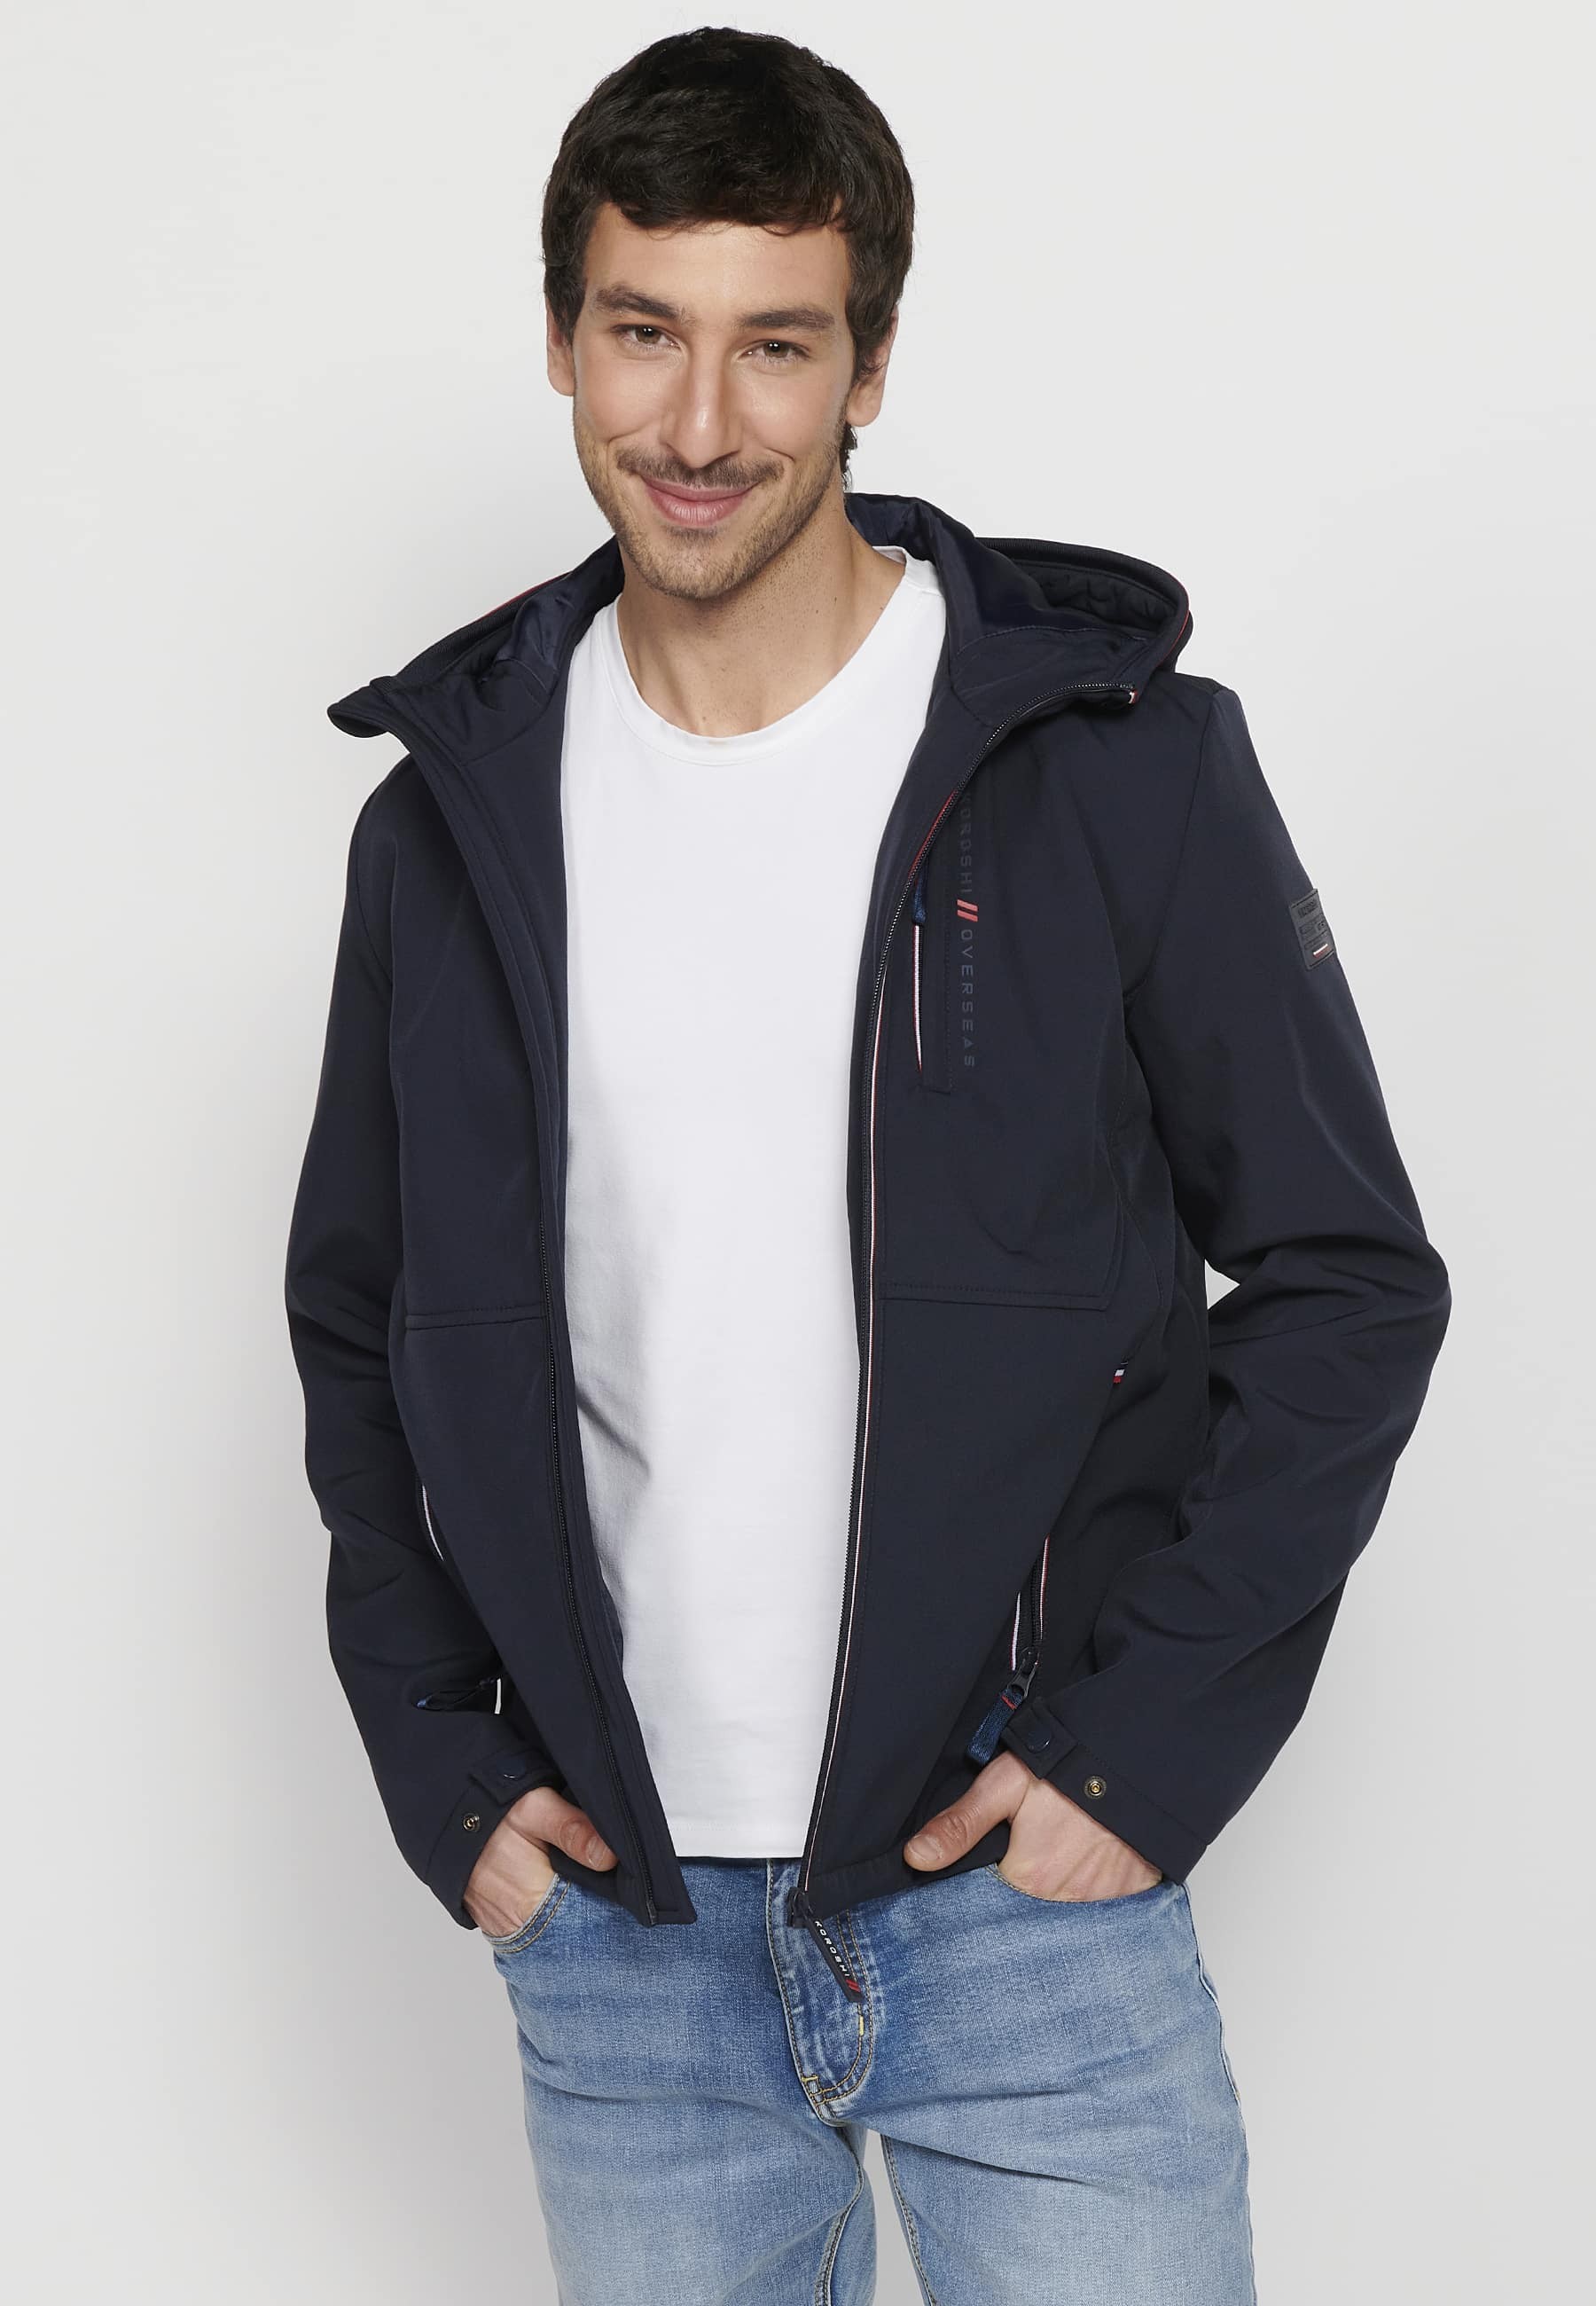 Navy Long Sleeve Jacket with Hooded Collar and Front Zipper Closure for Men 10